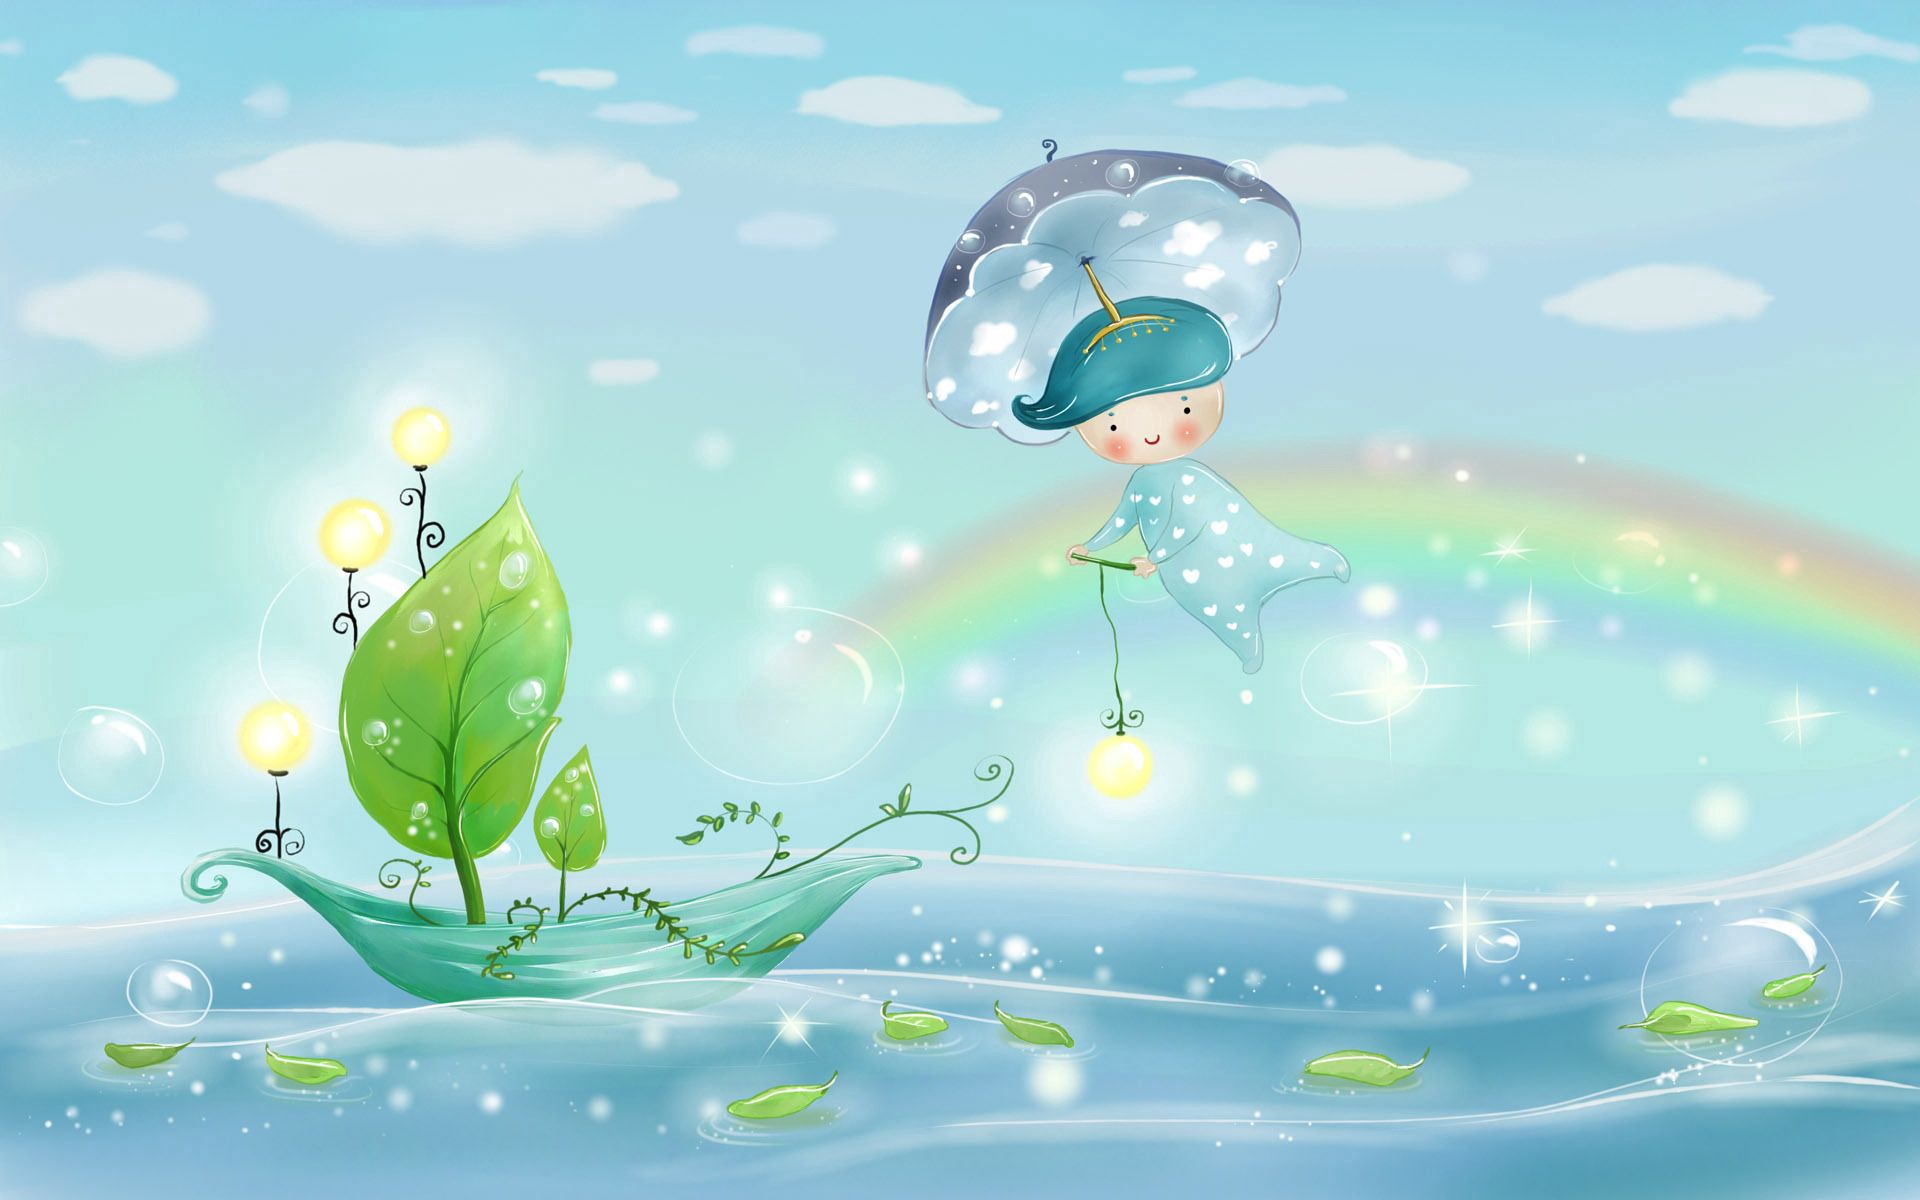 weather, drawing, nature, bubbles, vector, rain, picture, boat, lanterns, water, sky, leaves, sea, clouds, rainbow, lights, shine, light, sail, umbrella, boy Smartphone Background